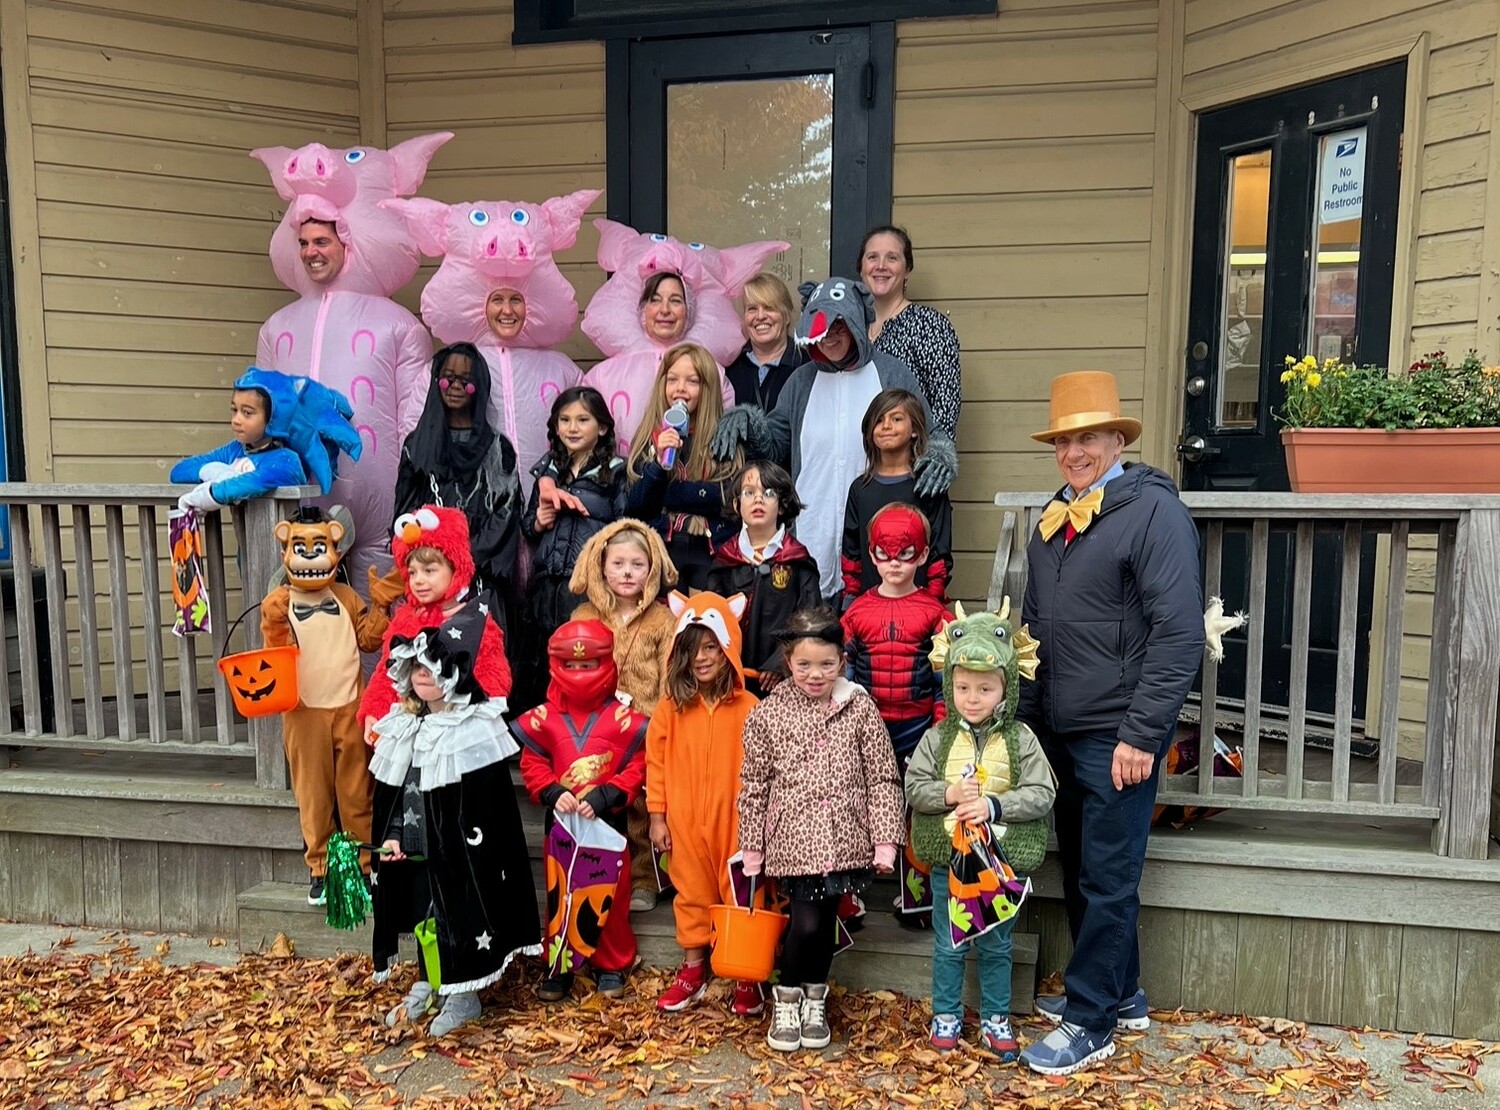 Sagaponack School students continued a 20-year tradition by participating in the annual Spooky Walk, stopping at the Sagaponack Post Office. COURTESY SAGAPONACK SCHOOL